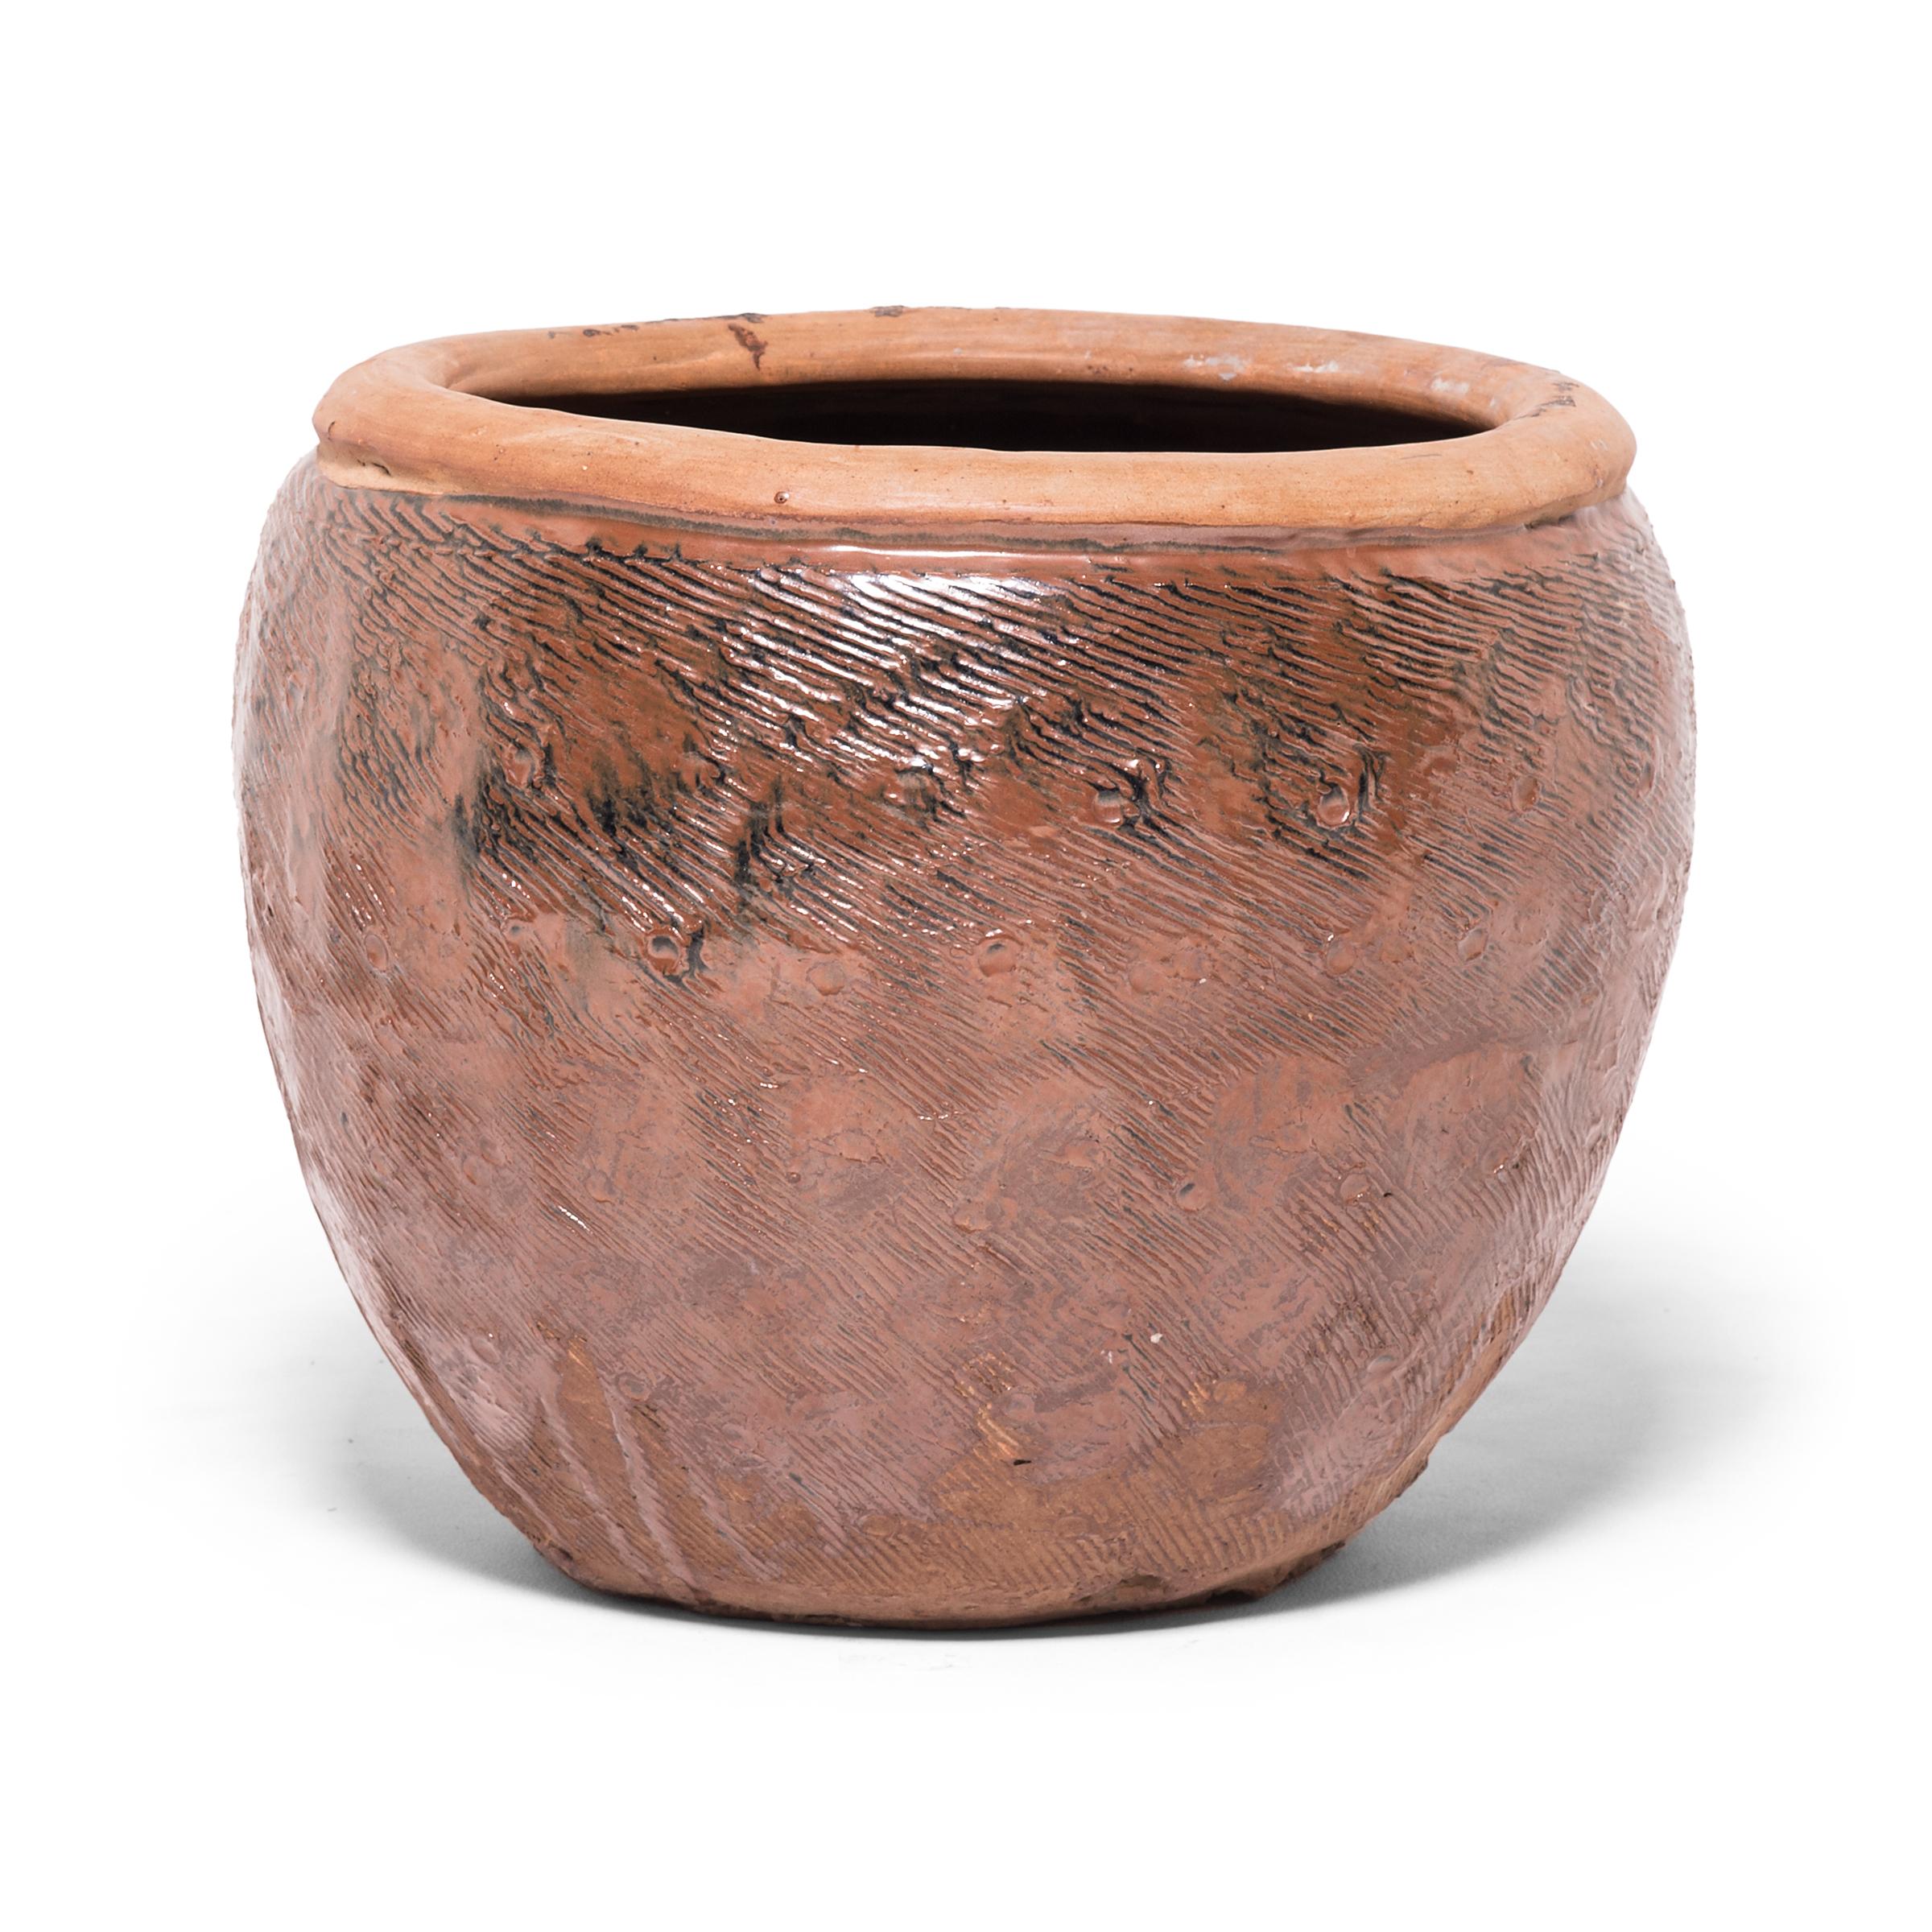 Once used to hold stockpiles of grain, this capacious terracotta jar is distinguished by the energetic incised pattern covering its exterior. Using a simple forked tool, the potter layered the vessel with dense etchings to enliven the simply shaped